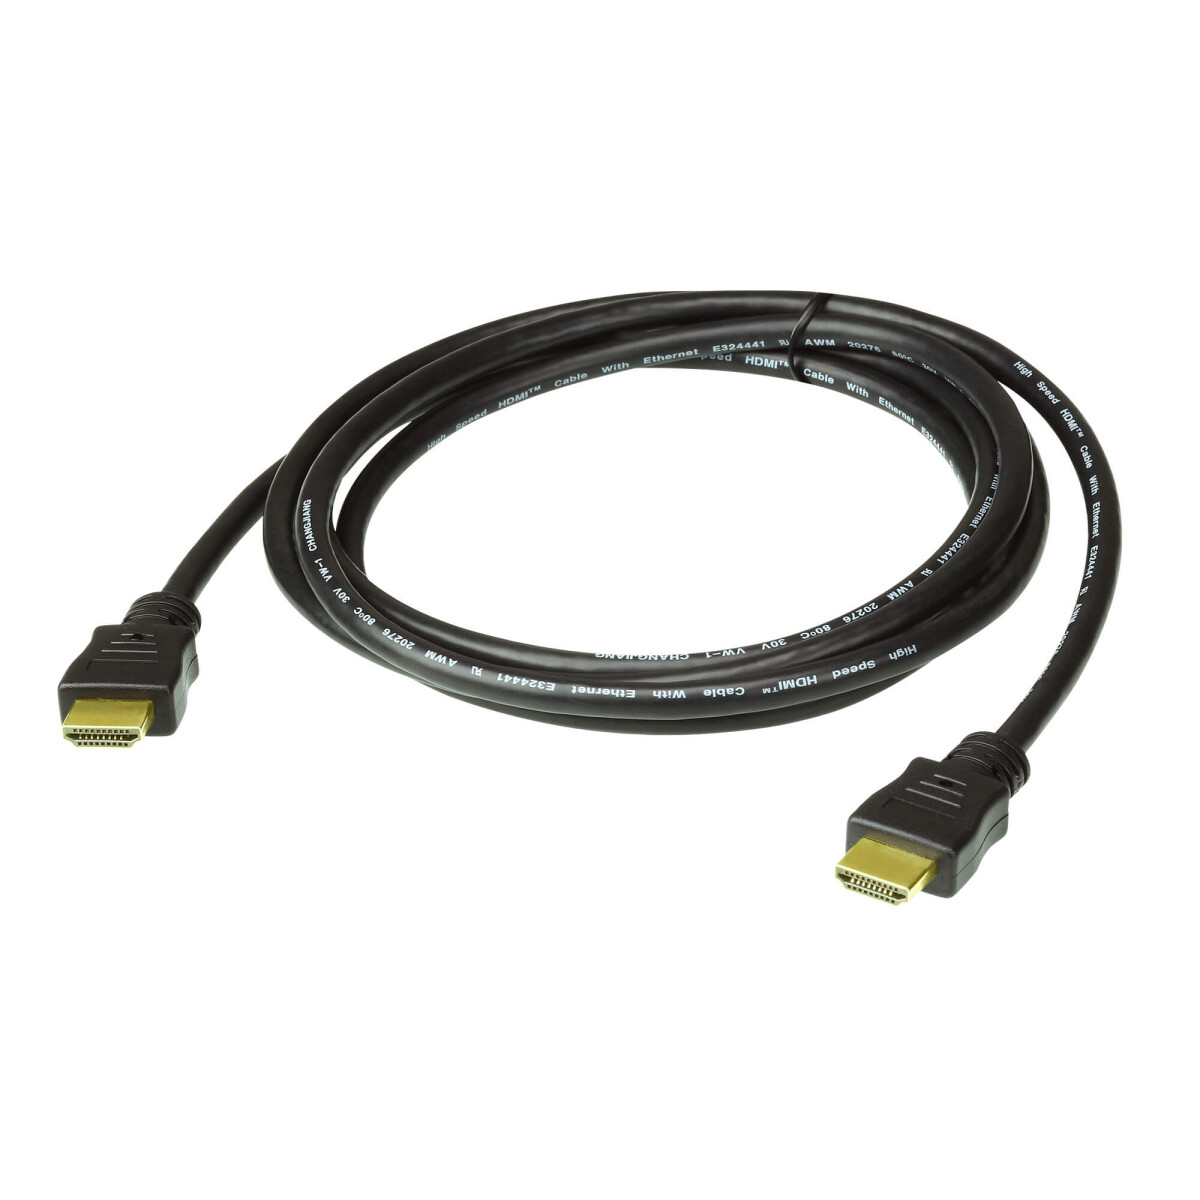 ATEN 2L-7D03H, High Speed HDMI Cable with Ethernet, 3m